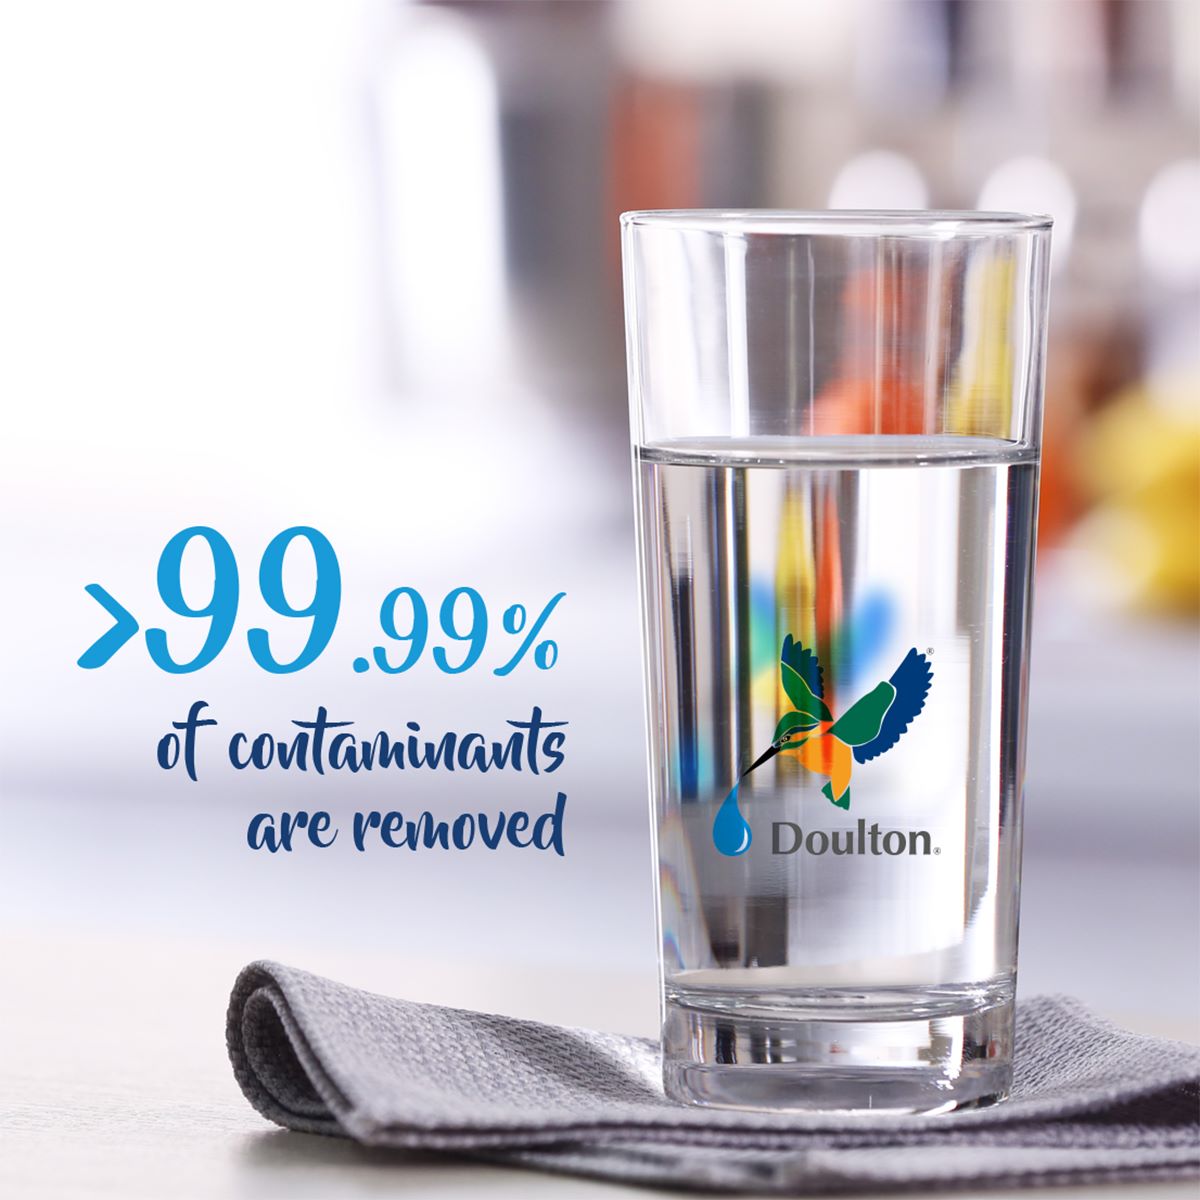 15% OFF+ Value Pack! Doulton Fluoride Filter + Biotect Ultra Drinking Water Filter Candle